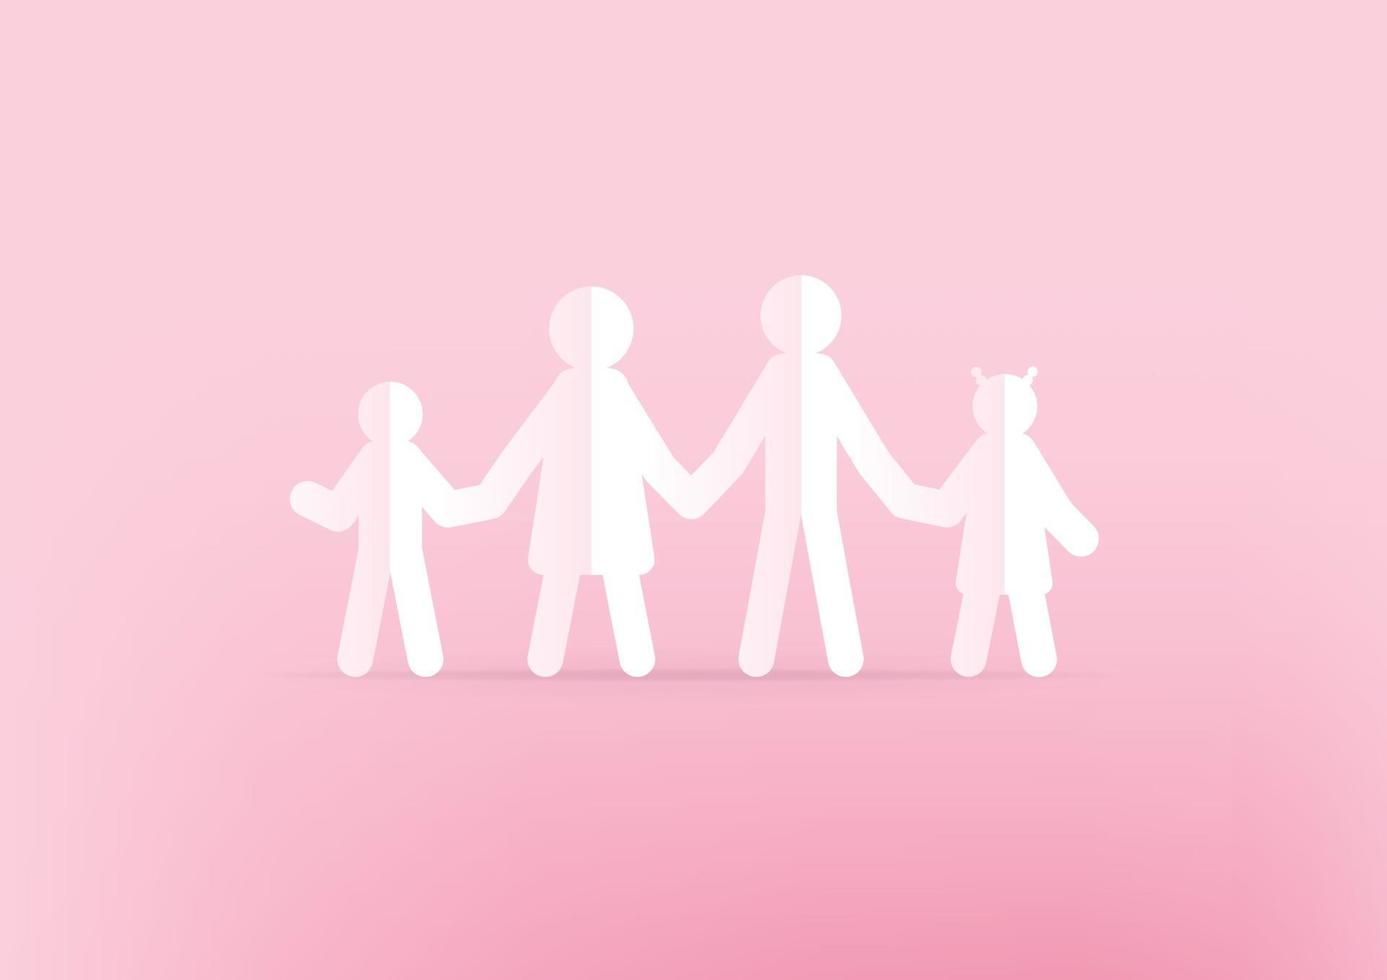 Family paper holding hands on pink background. Happy family concept. vector